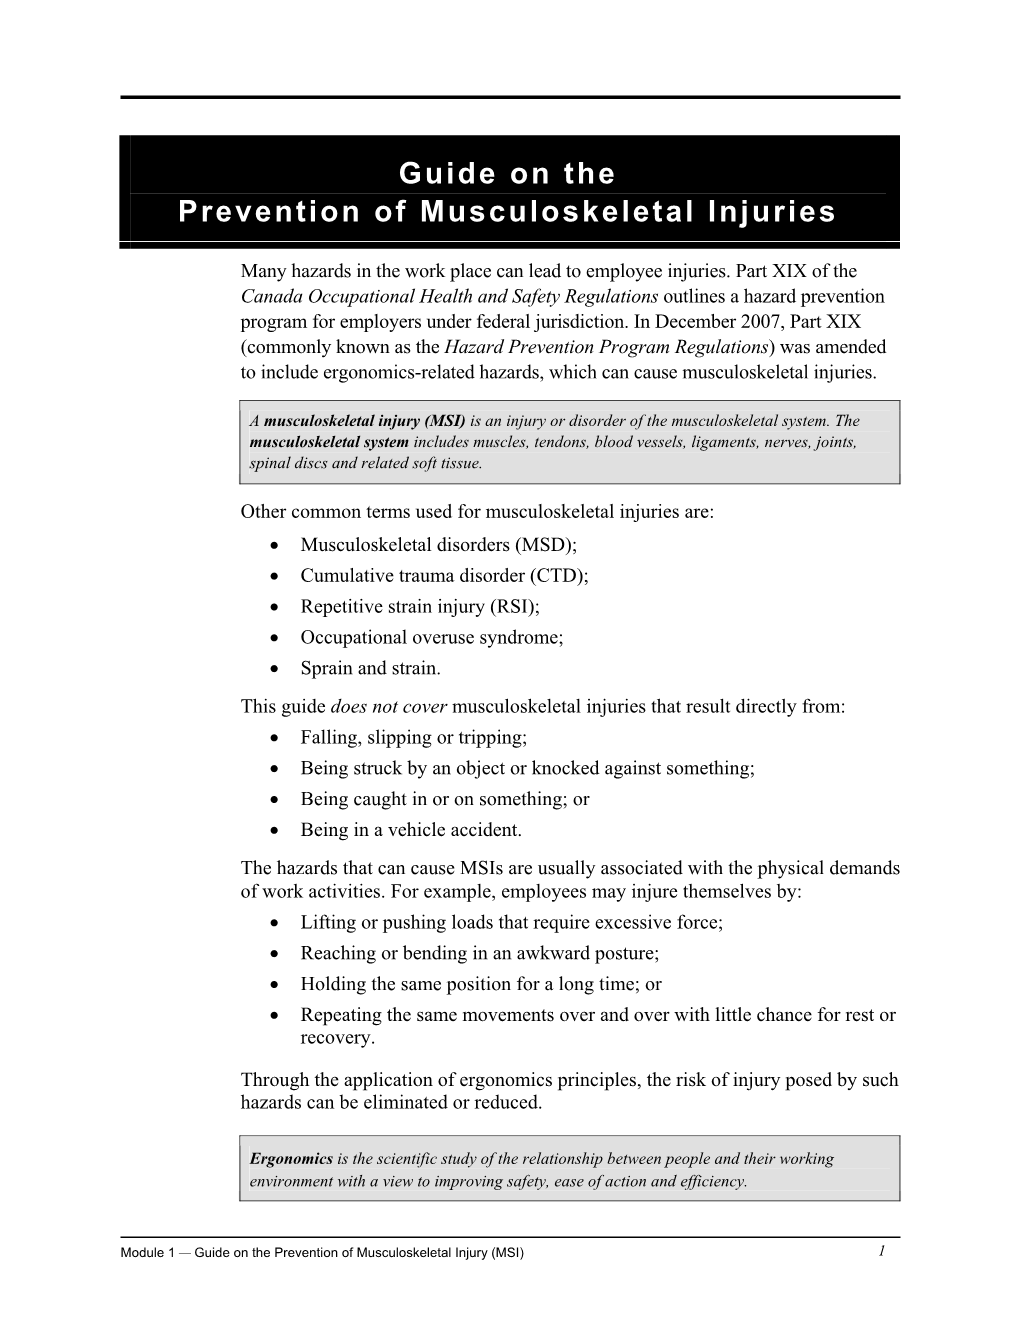 Guide on the Prevention of Musculoskeletal Injuries